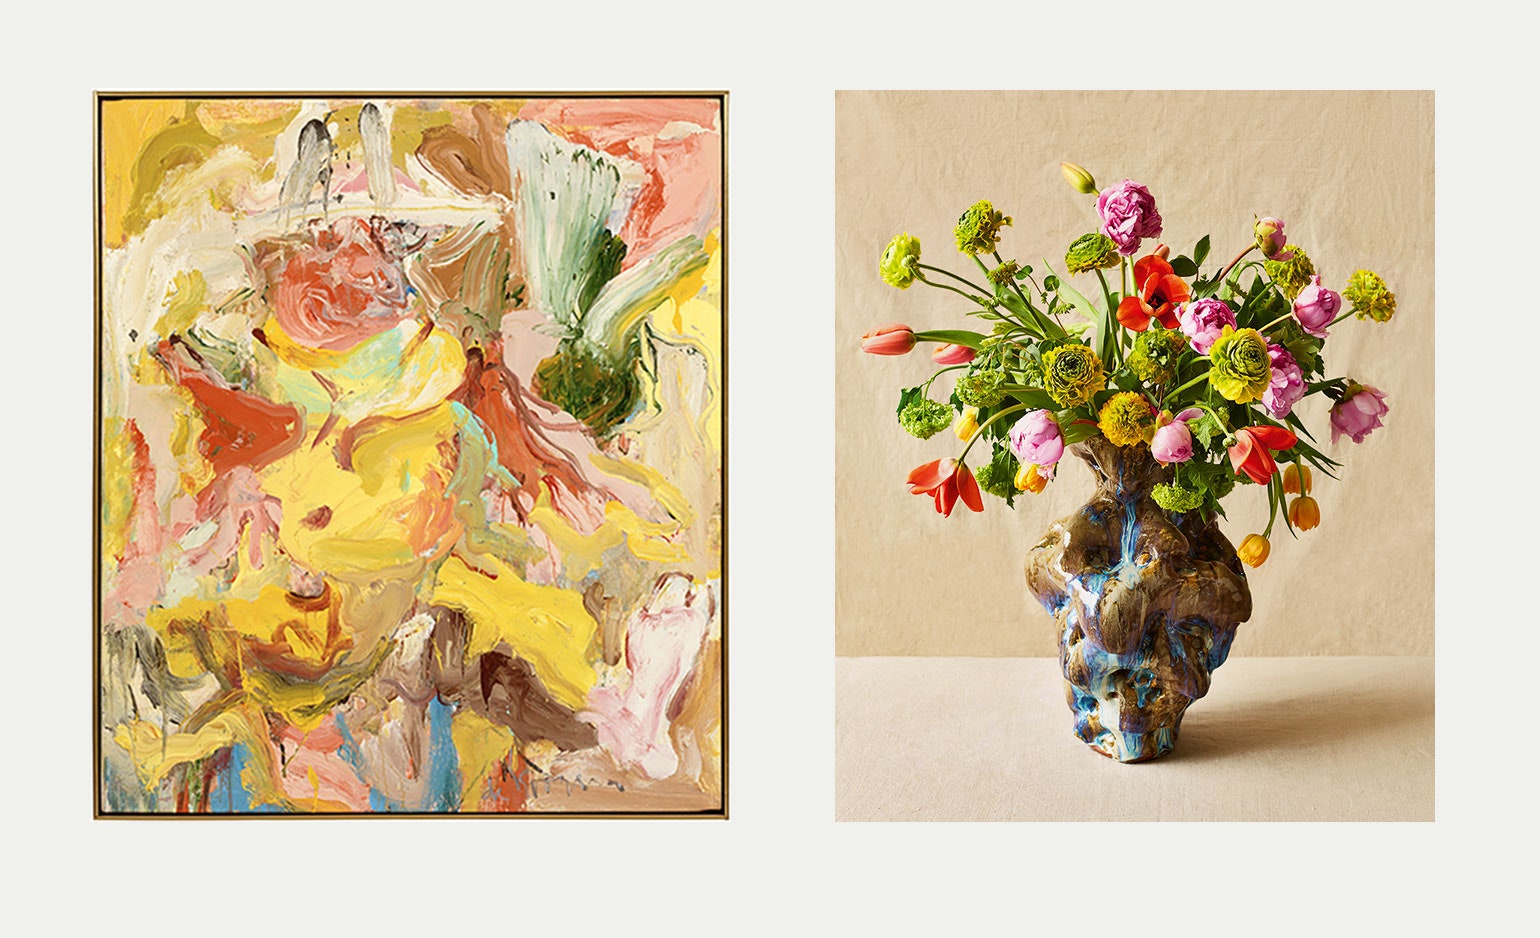 Lindsey Taylor’s floral interpretations of historic paintings